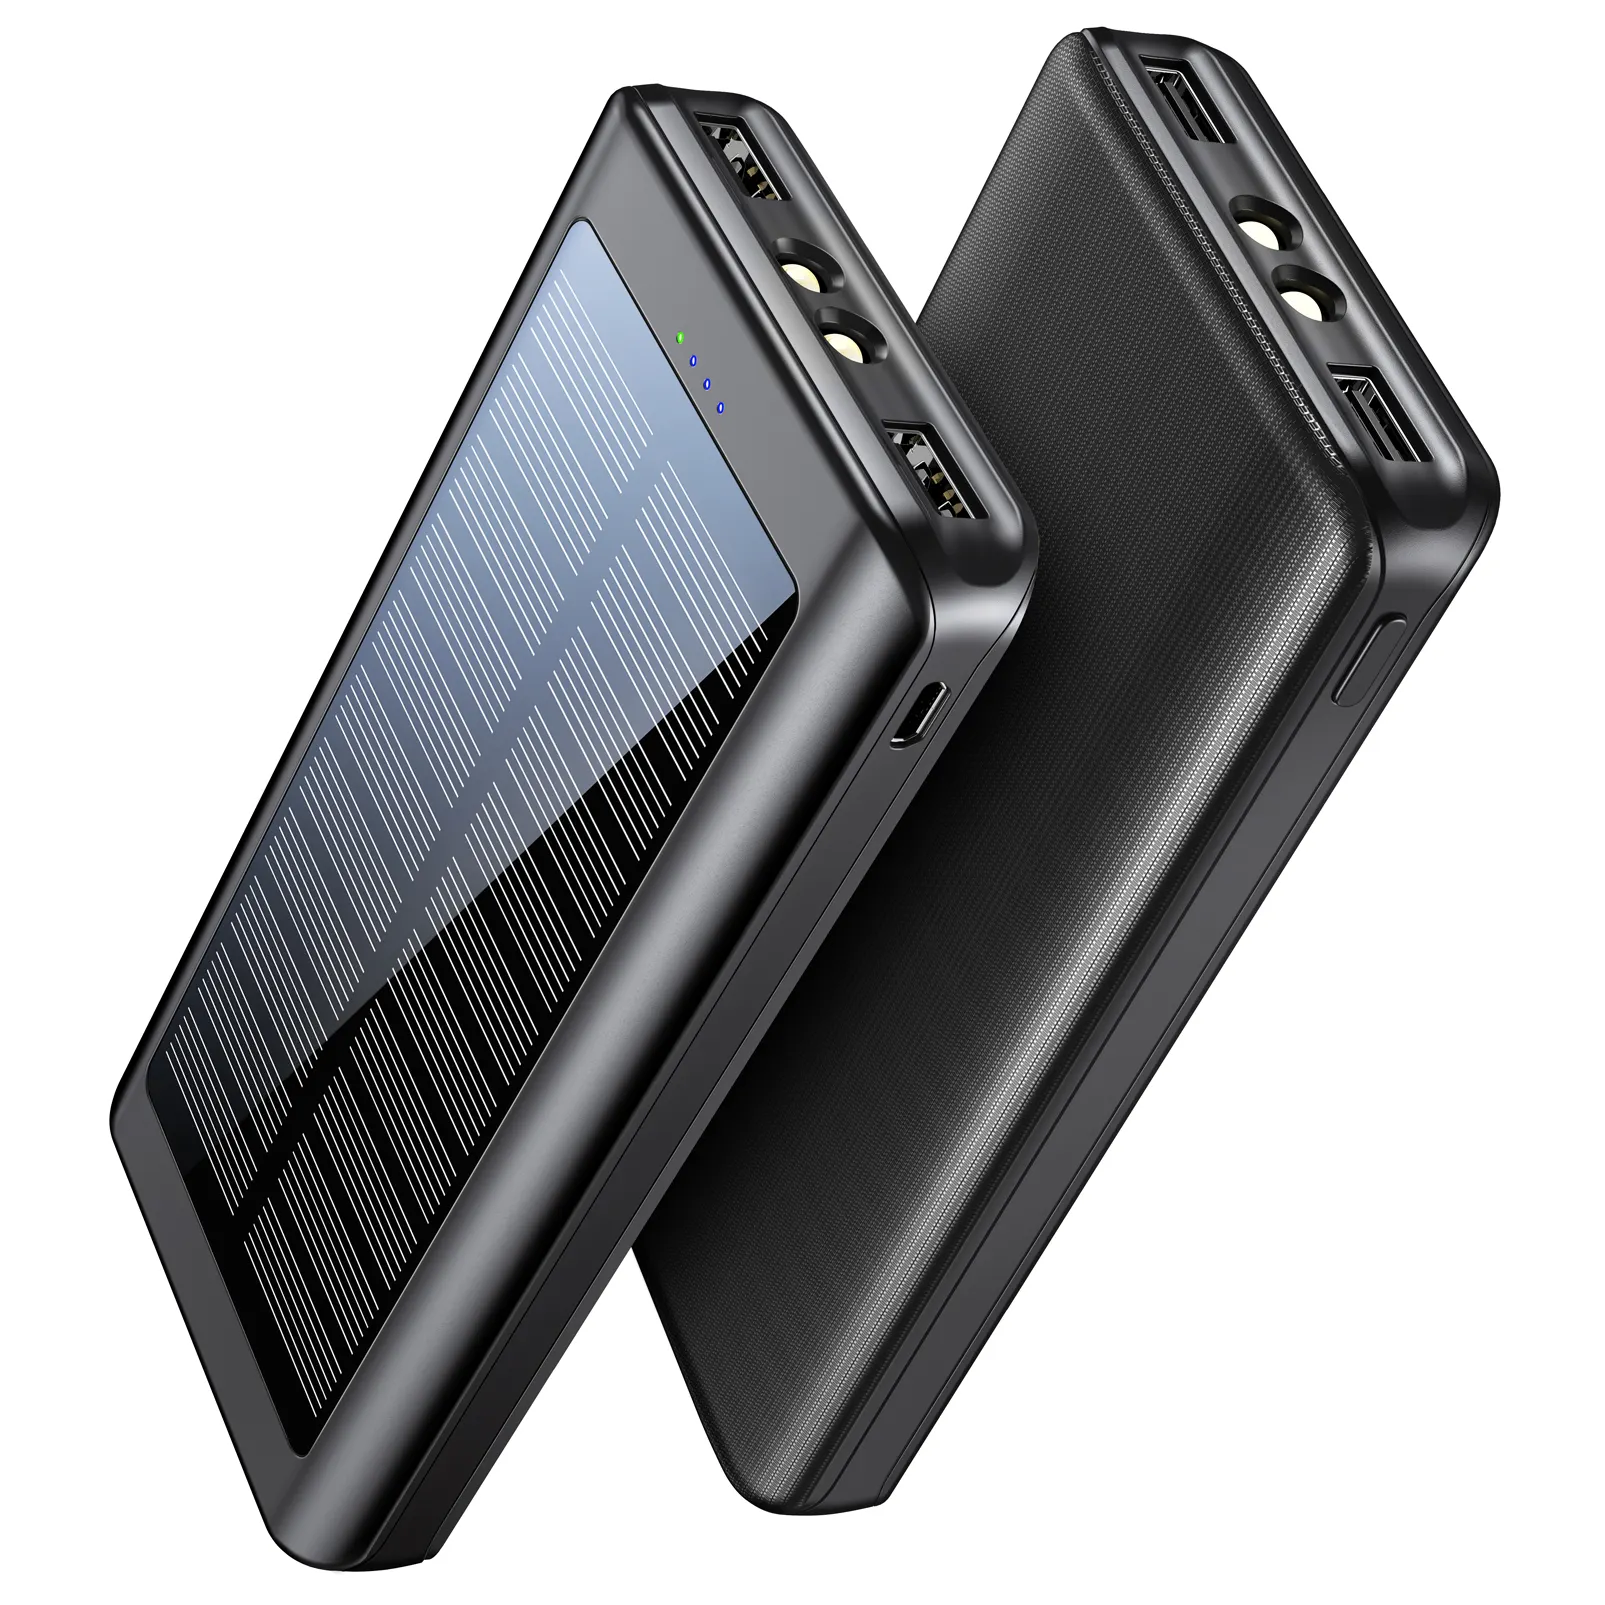 Crazy Hot in Germany UK Italy Amazon Slim Solar Charger Dual Torch Solar Powerbank 30000 mAh External Battery